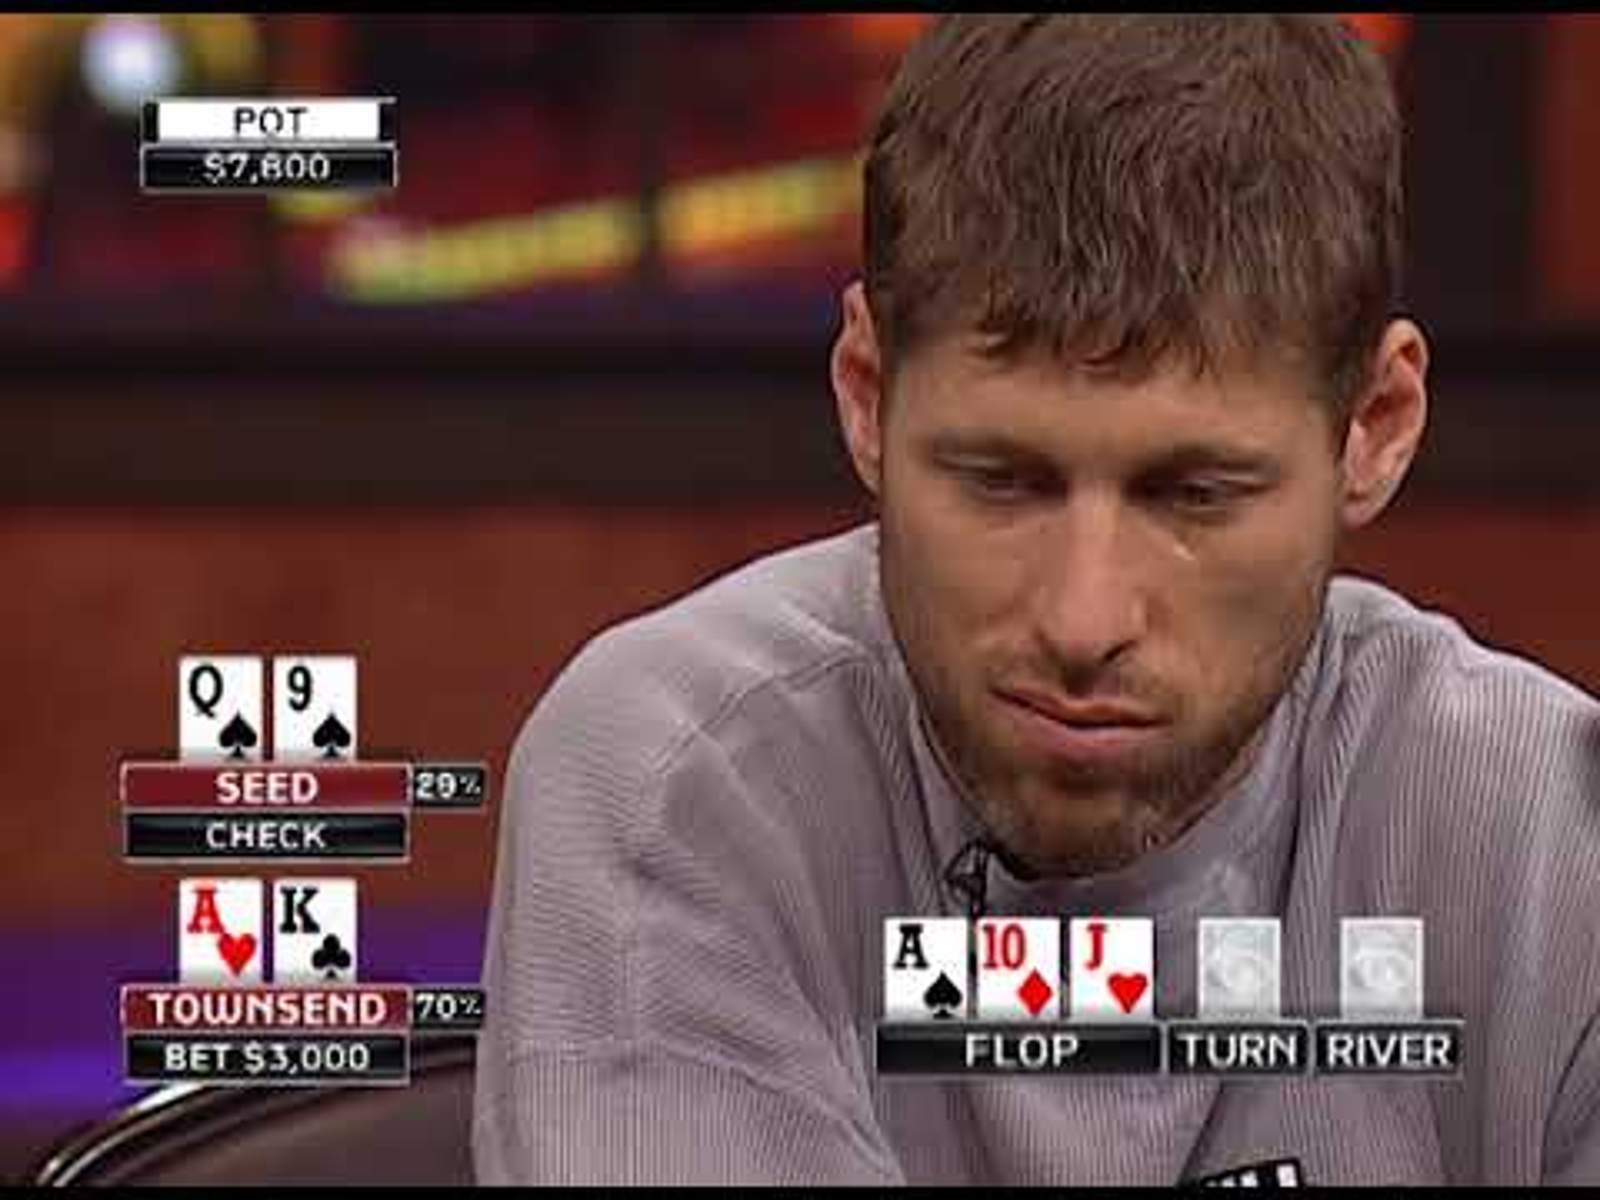 Throwback Hands: Brian Townsend Might Beat But It's Too Late Now on PokerGO